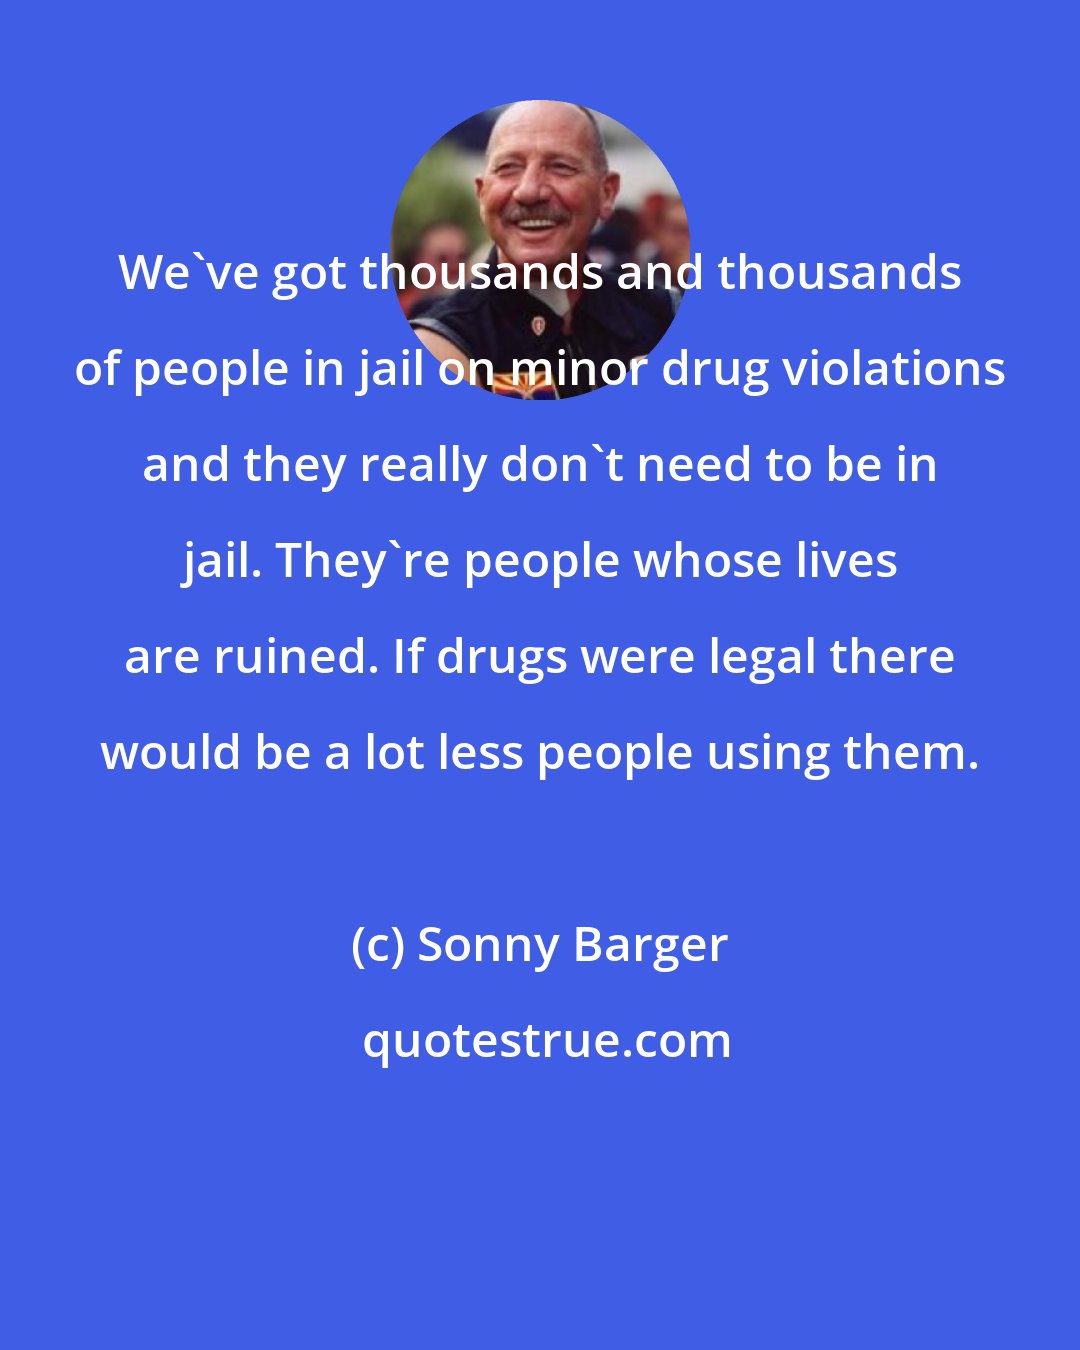 Sonny Barger: We've got thousands and thousands of people in jail on minor drug violations and they really don't need to be in jail. They're people whose lives are ruined. If drugs were legal there would be a lot less people using them.